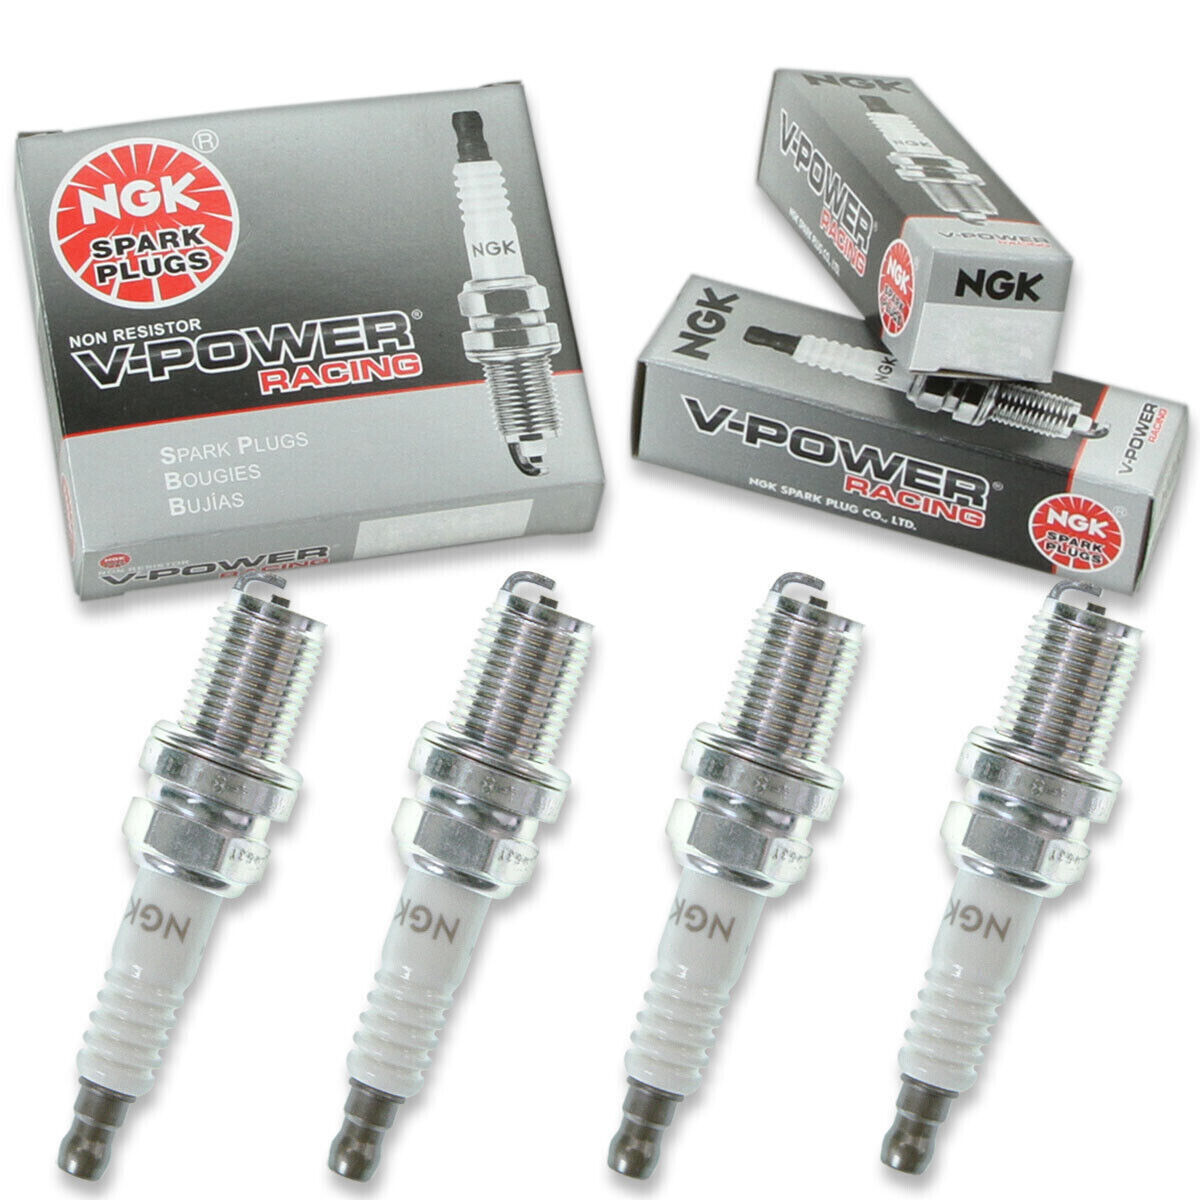 NGK V-Power Racing Spark Plugs Turbo Nitrous Supercharger Set of 4 R5671A-8 NEW